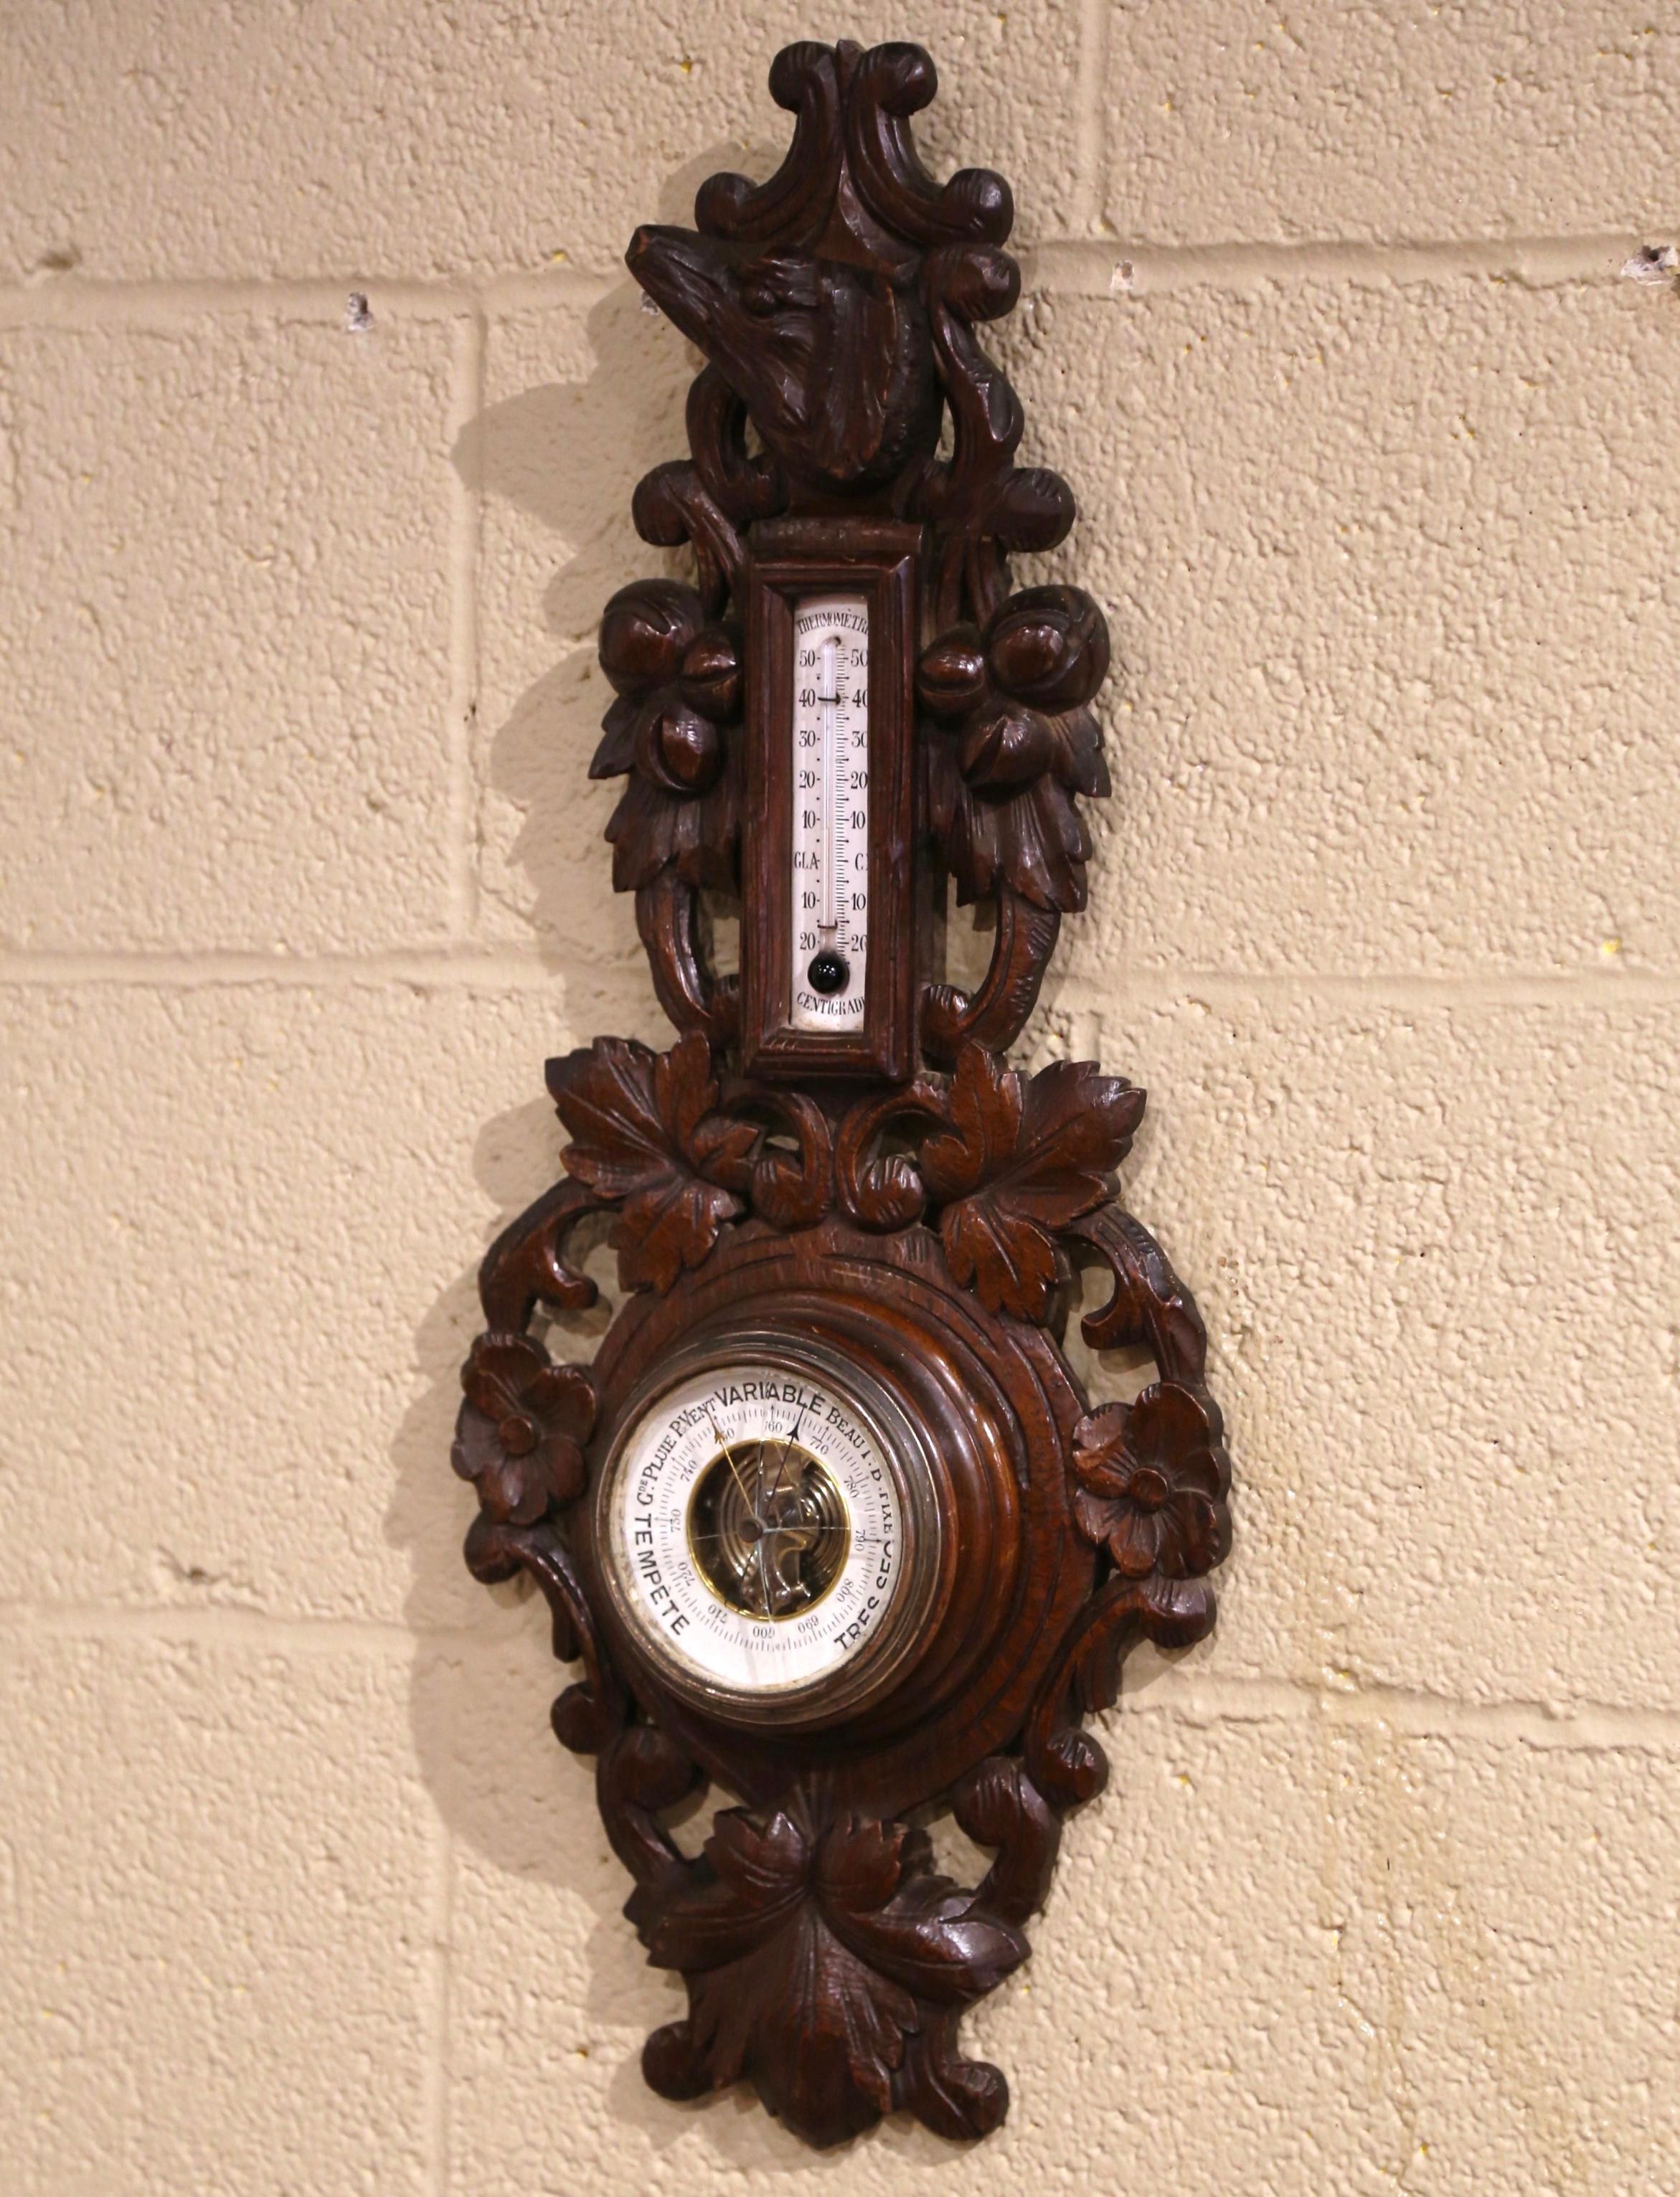 This elegant antique wall hanging barometer and thermometer was crafted in France, circa 1890. The carved oak weather and temperature reader features impressive, high-relief carvings of acorn and leaf motifs throughout; it is further embellished